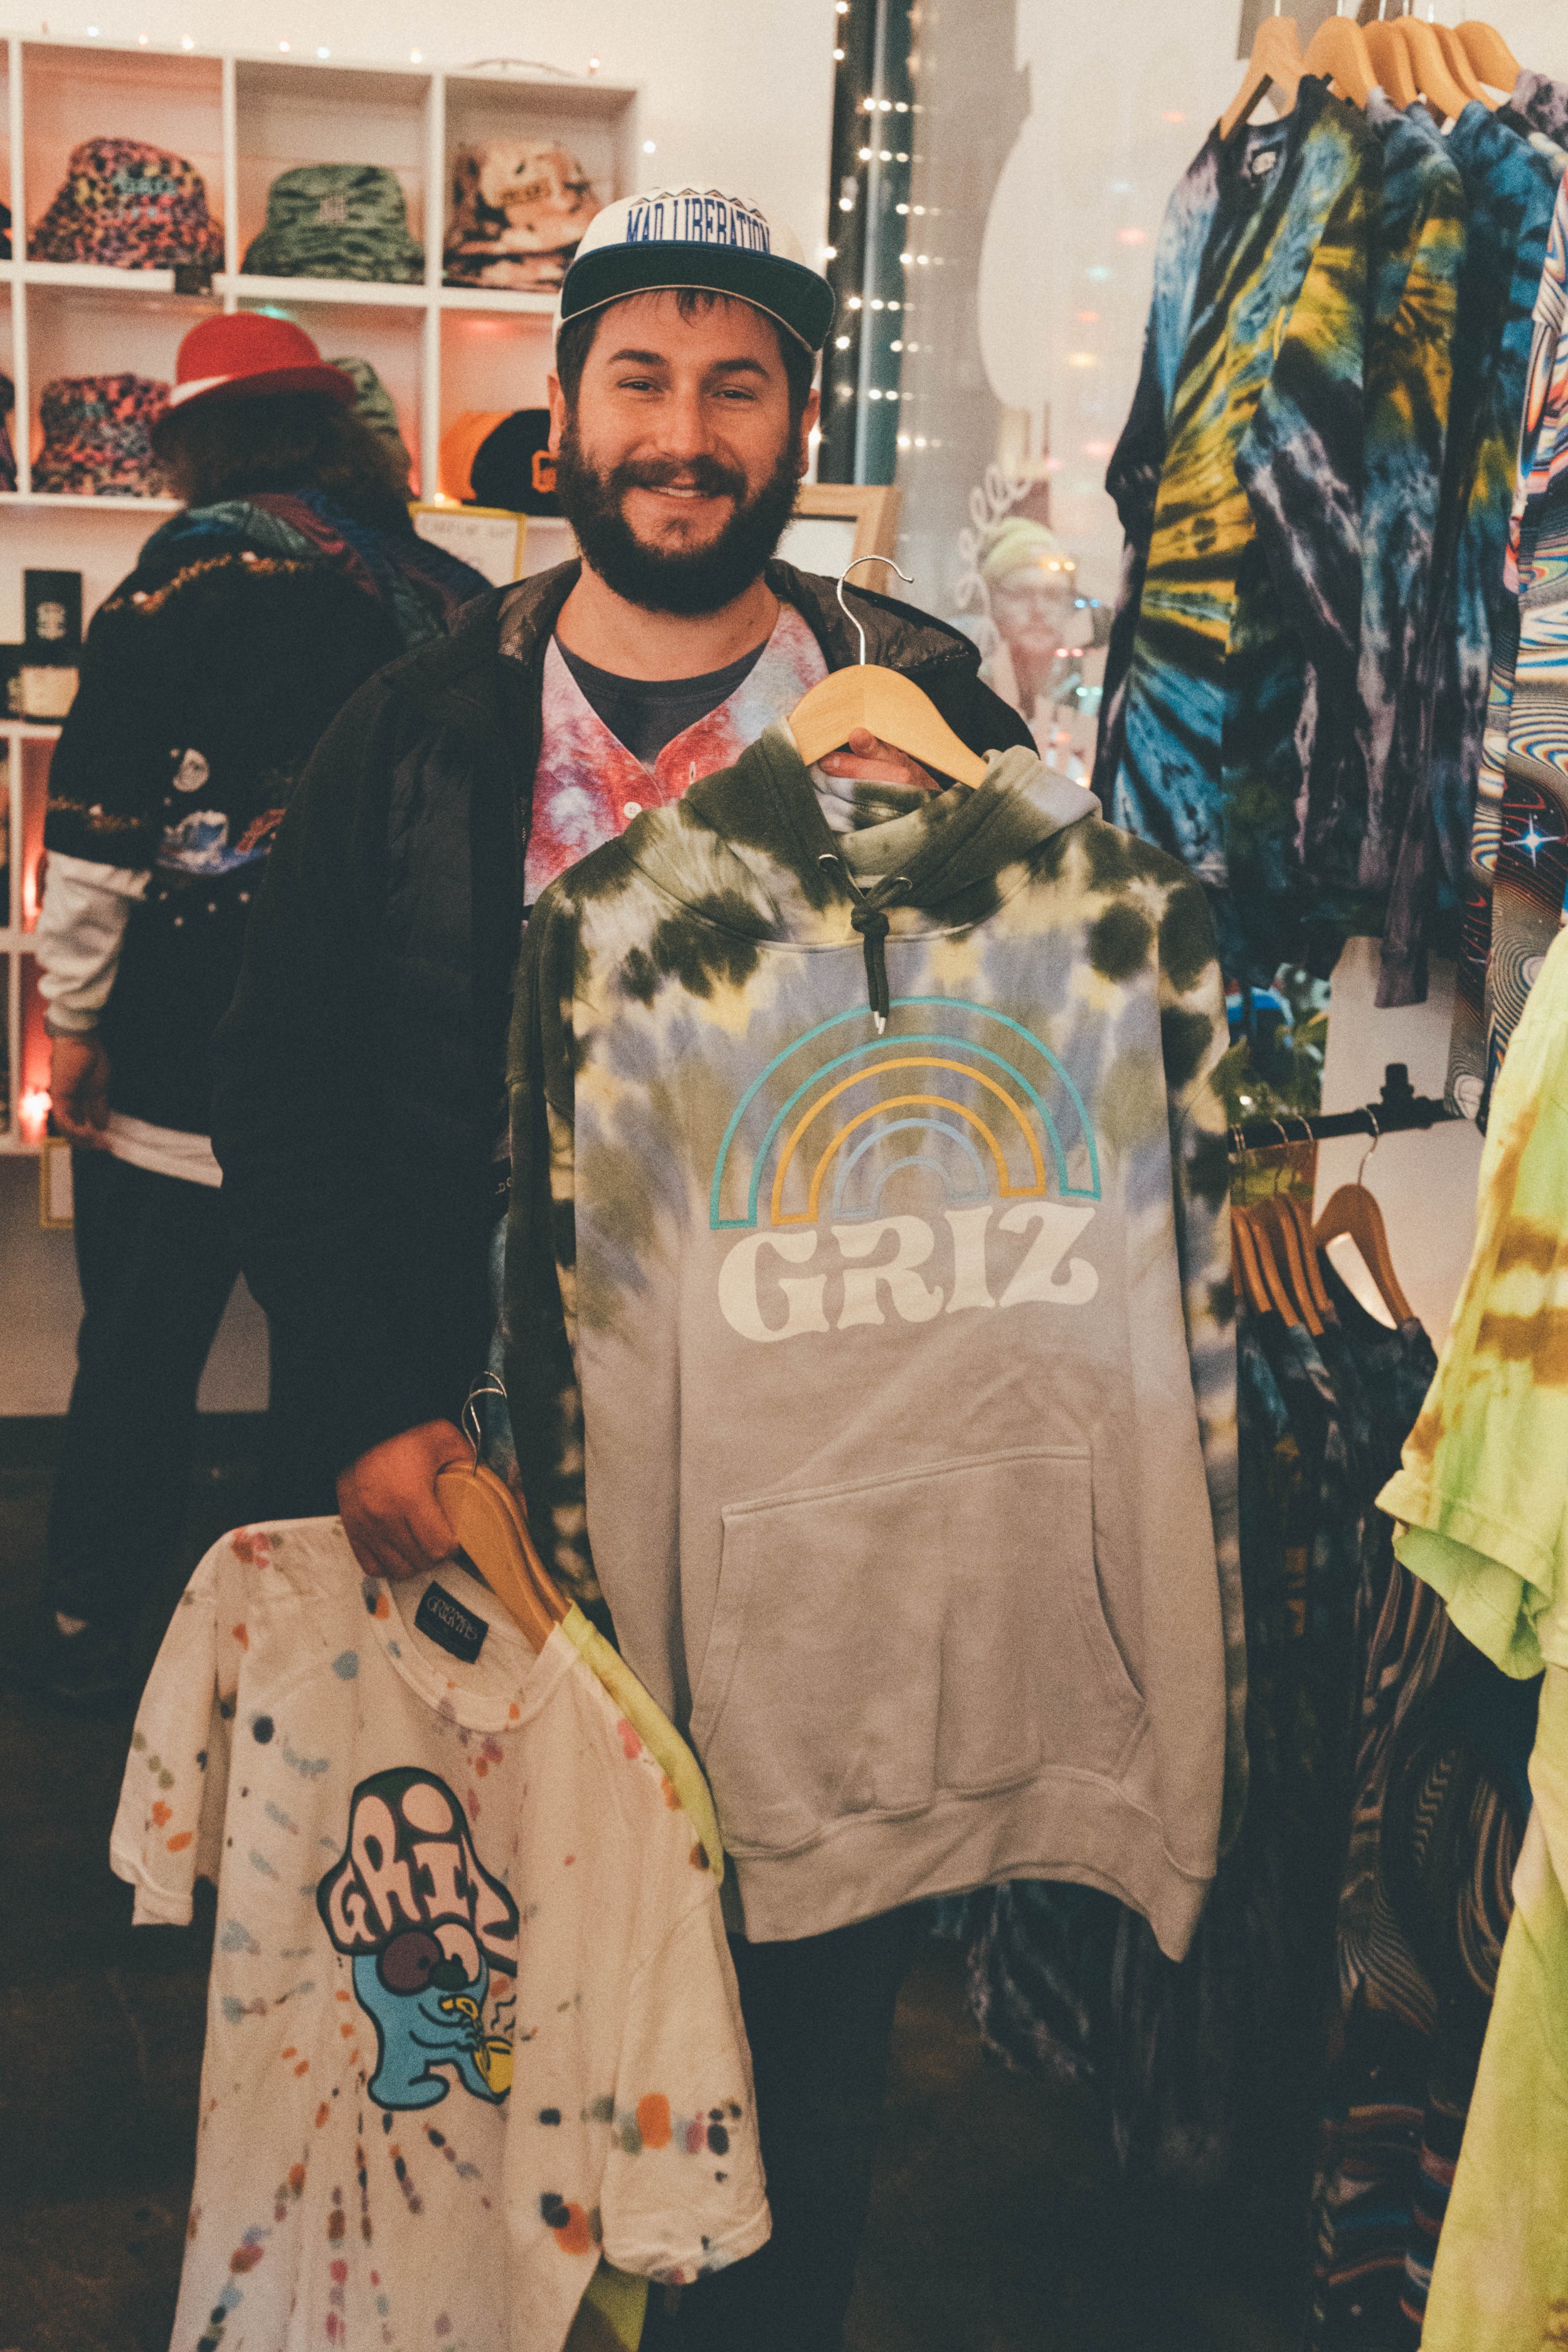 On the first day of Grizmas, Griz open up his charity shop